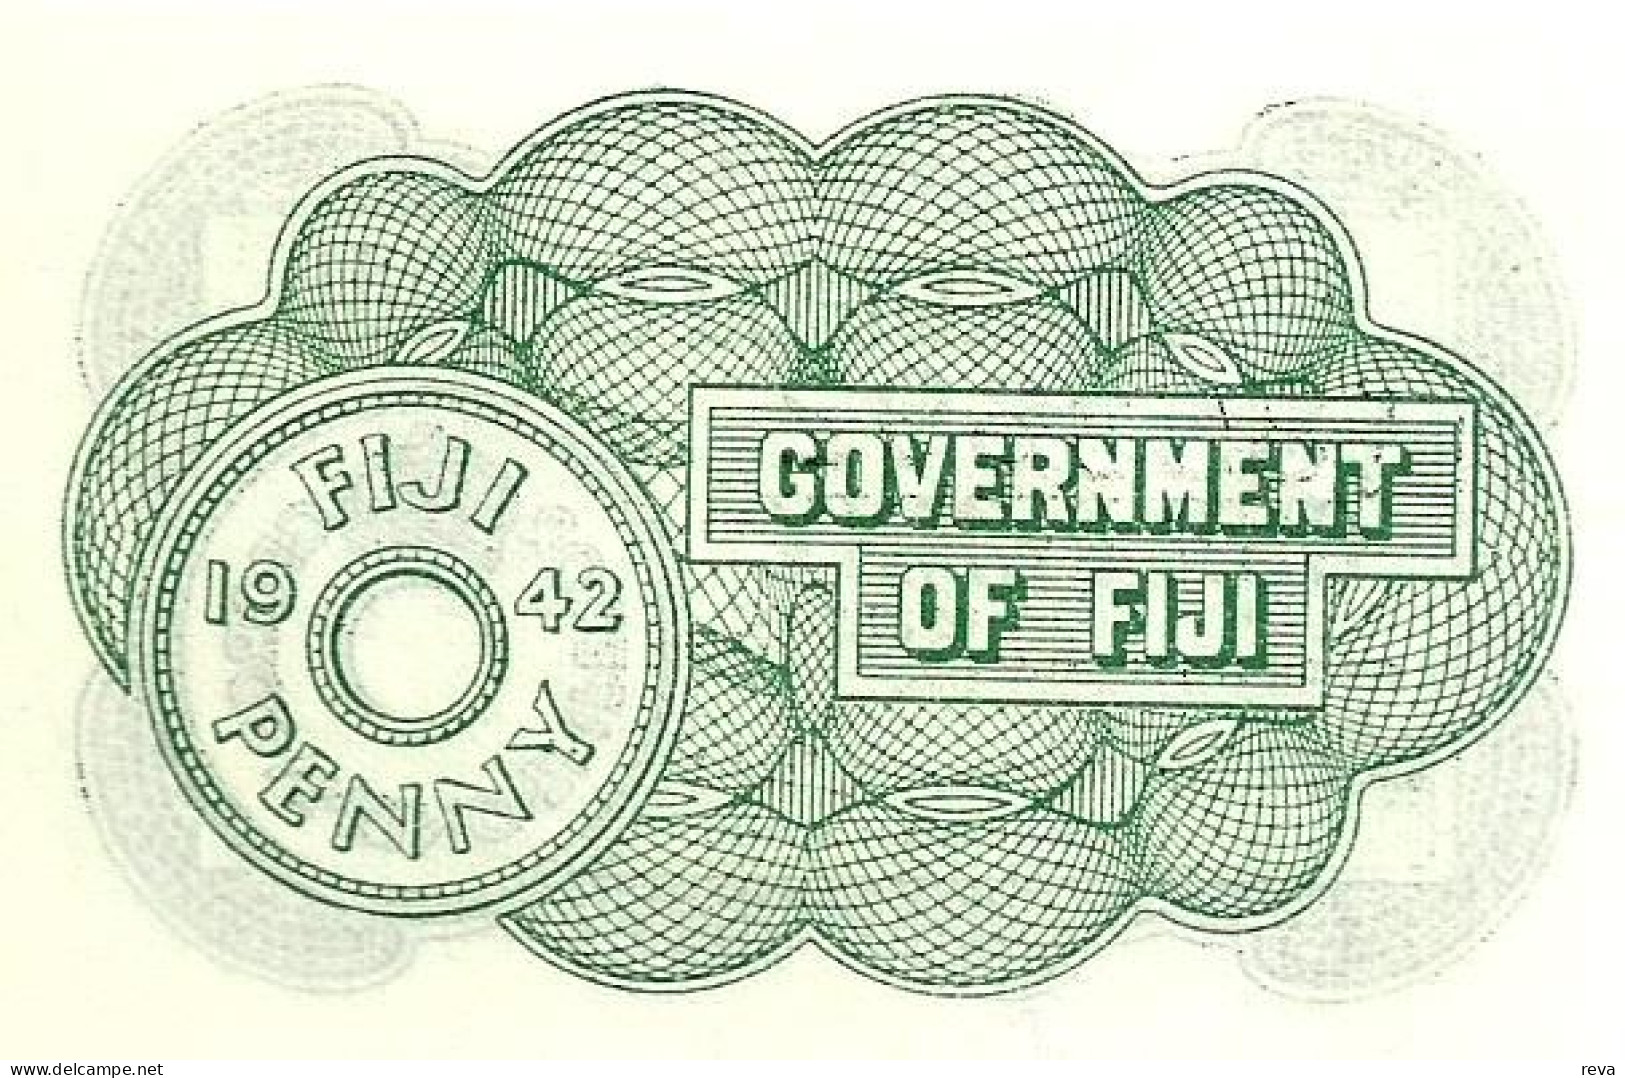 FIJI 1 PENNY GREEN COIN FRONT AND BACK DATED 01-07-1942 EF P.47a READ DESCRIPTION!! - Fidji